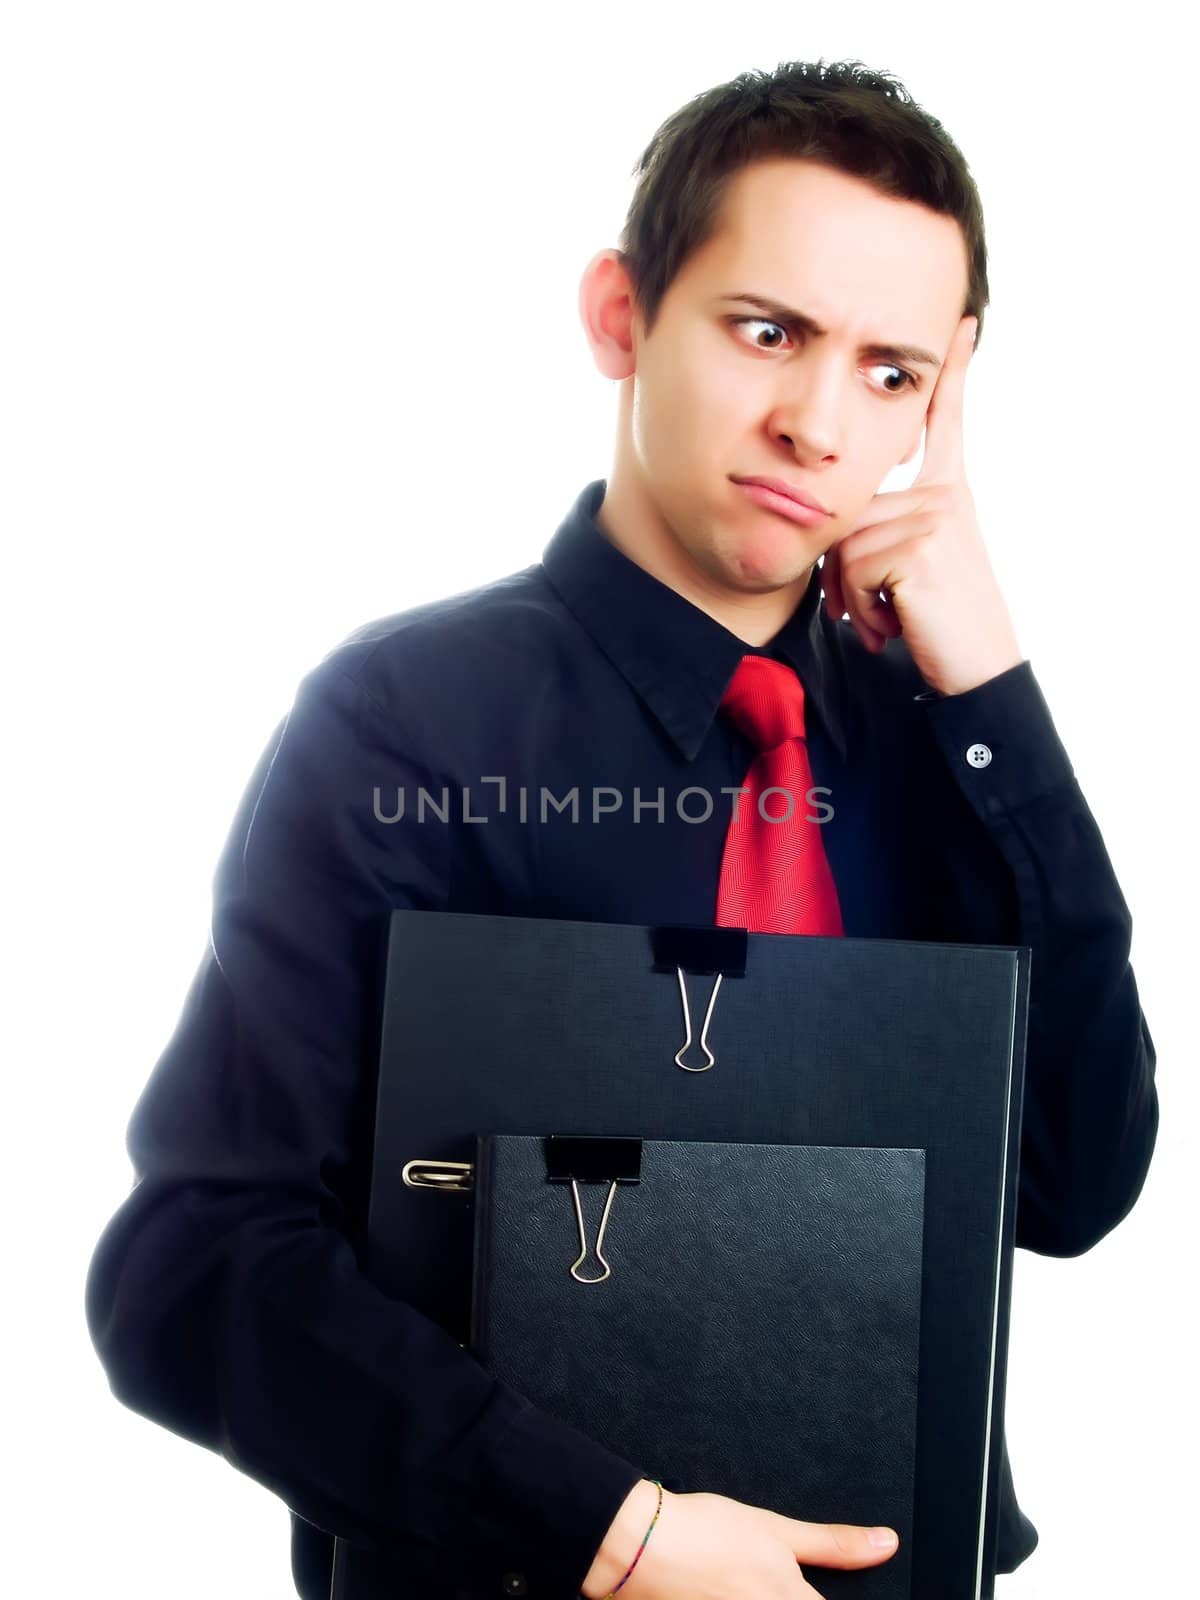 Stressed young businessman